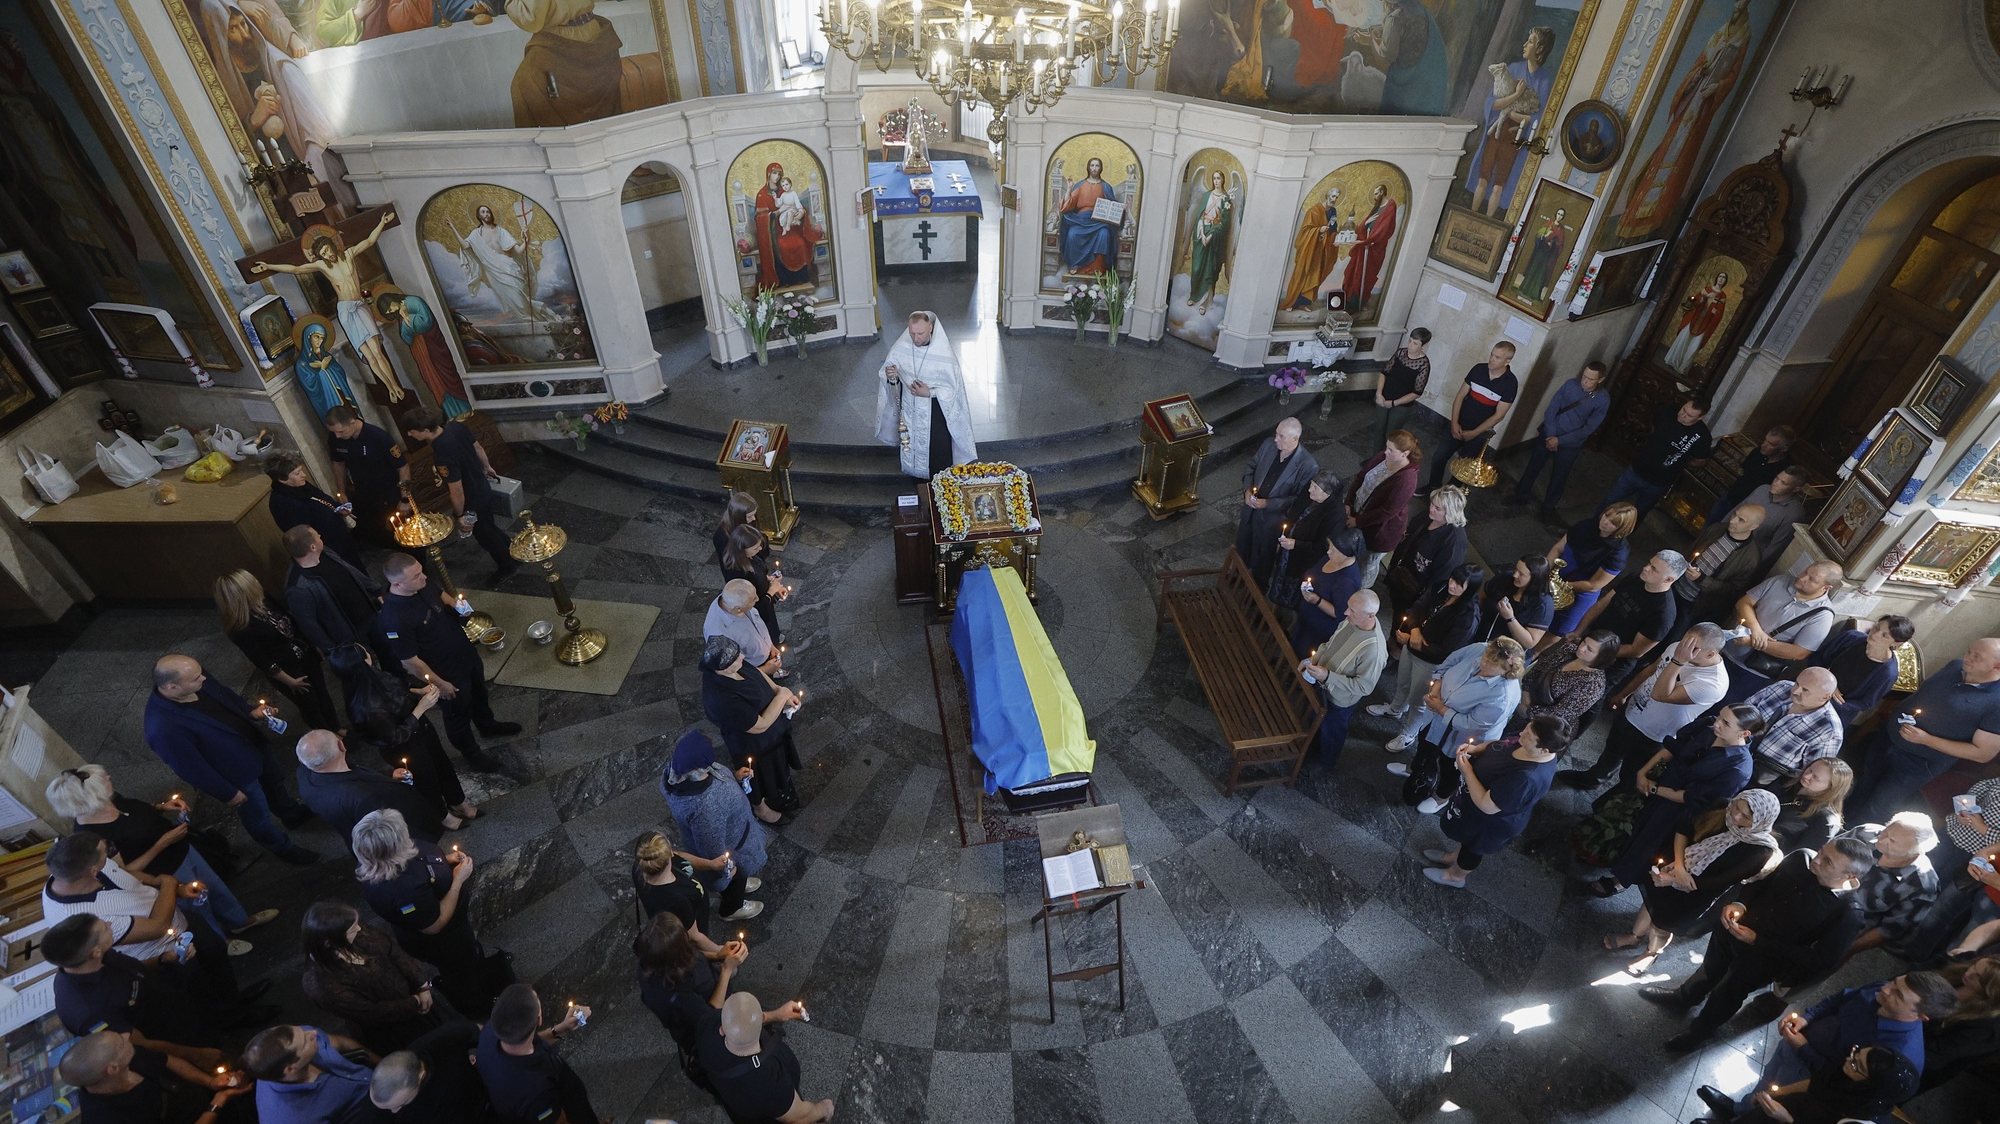 epa10848410 Relatives, friends and comrades of late Ukrainian rescue unit member Ruslan Koshovyi attend his funeral in Kyiv, Ukraine, 08 September 2023. Koshovyi died on 24 February 2022, the first day of the Russian invasion of Ukraine, while trying to save his subordinates and equipment at the Hostomel airfield near Kyiv. The Kremlin troops did not initially allow for Koshovyi’s body to be collected. After the Russians had left Hostomel, his human remains were not immediately found. Only now, over 18 months after his death, was there an opportunity to have a proper funeral.  EPA/SERGEY DOLZHENKO 27479